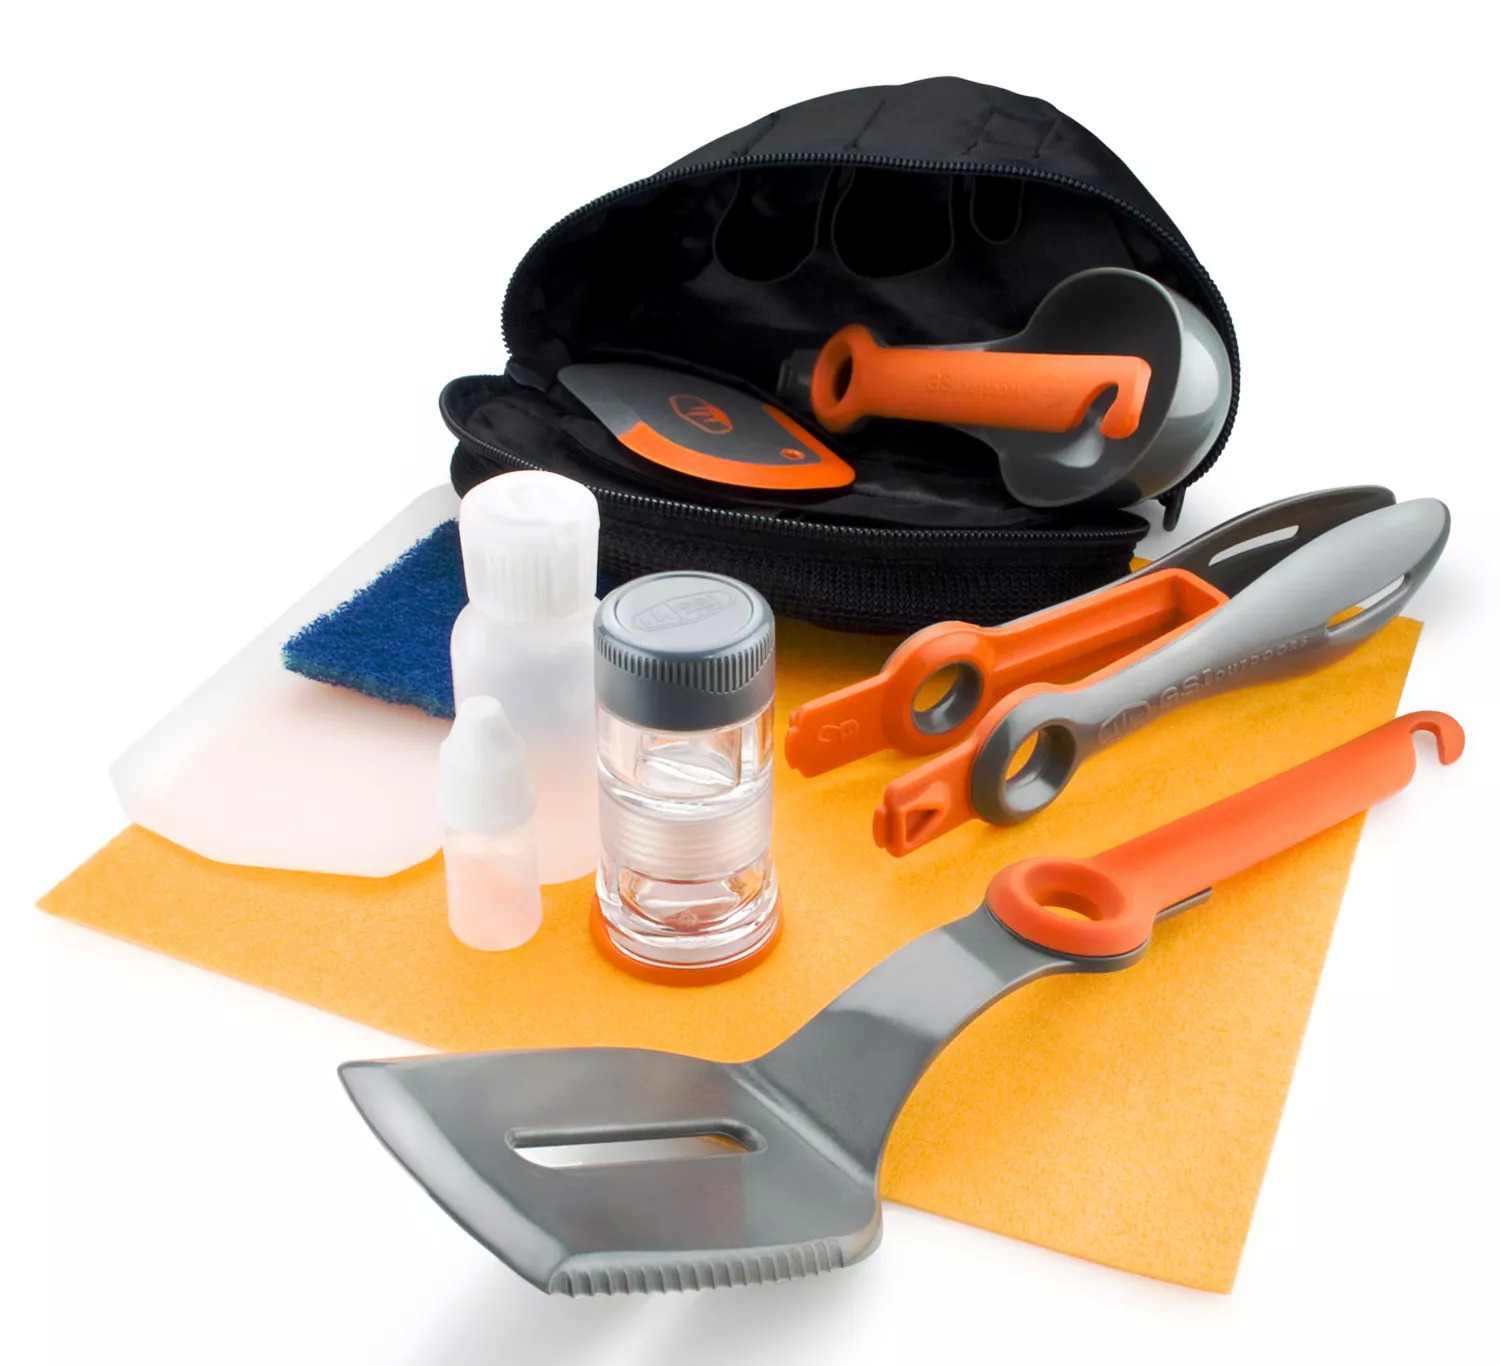 GSI Outdoors: Crossover Kitchen Kit $13.50, Java Press $12.75 + Free Shipping on $49+